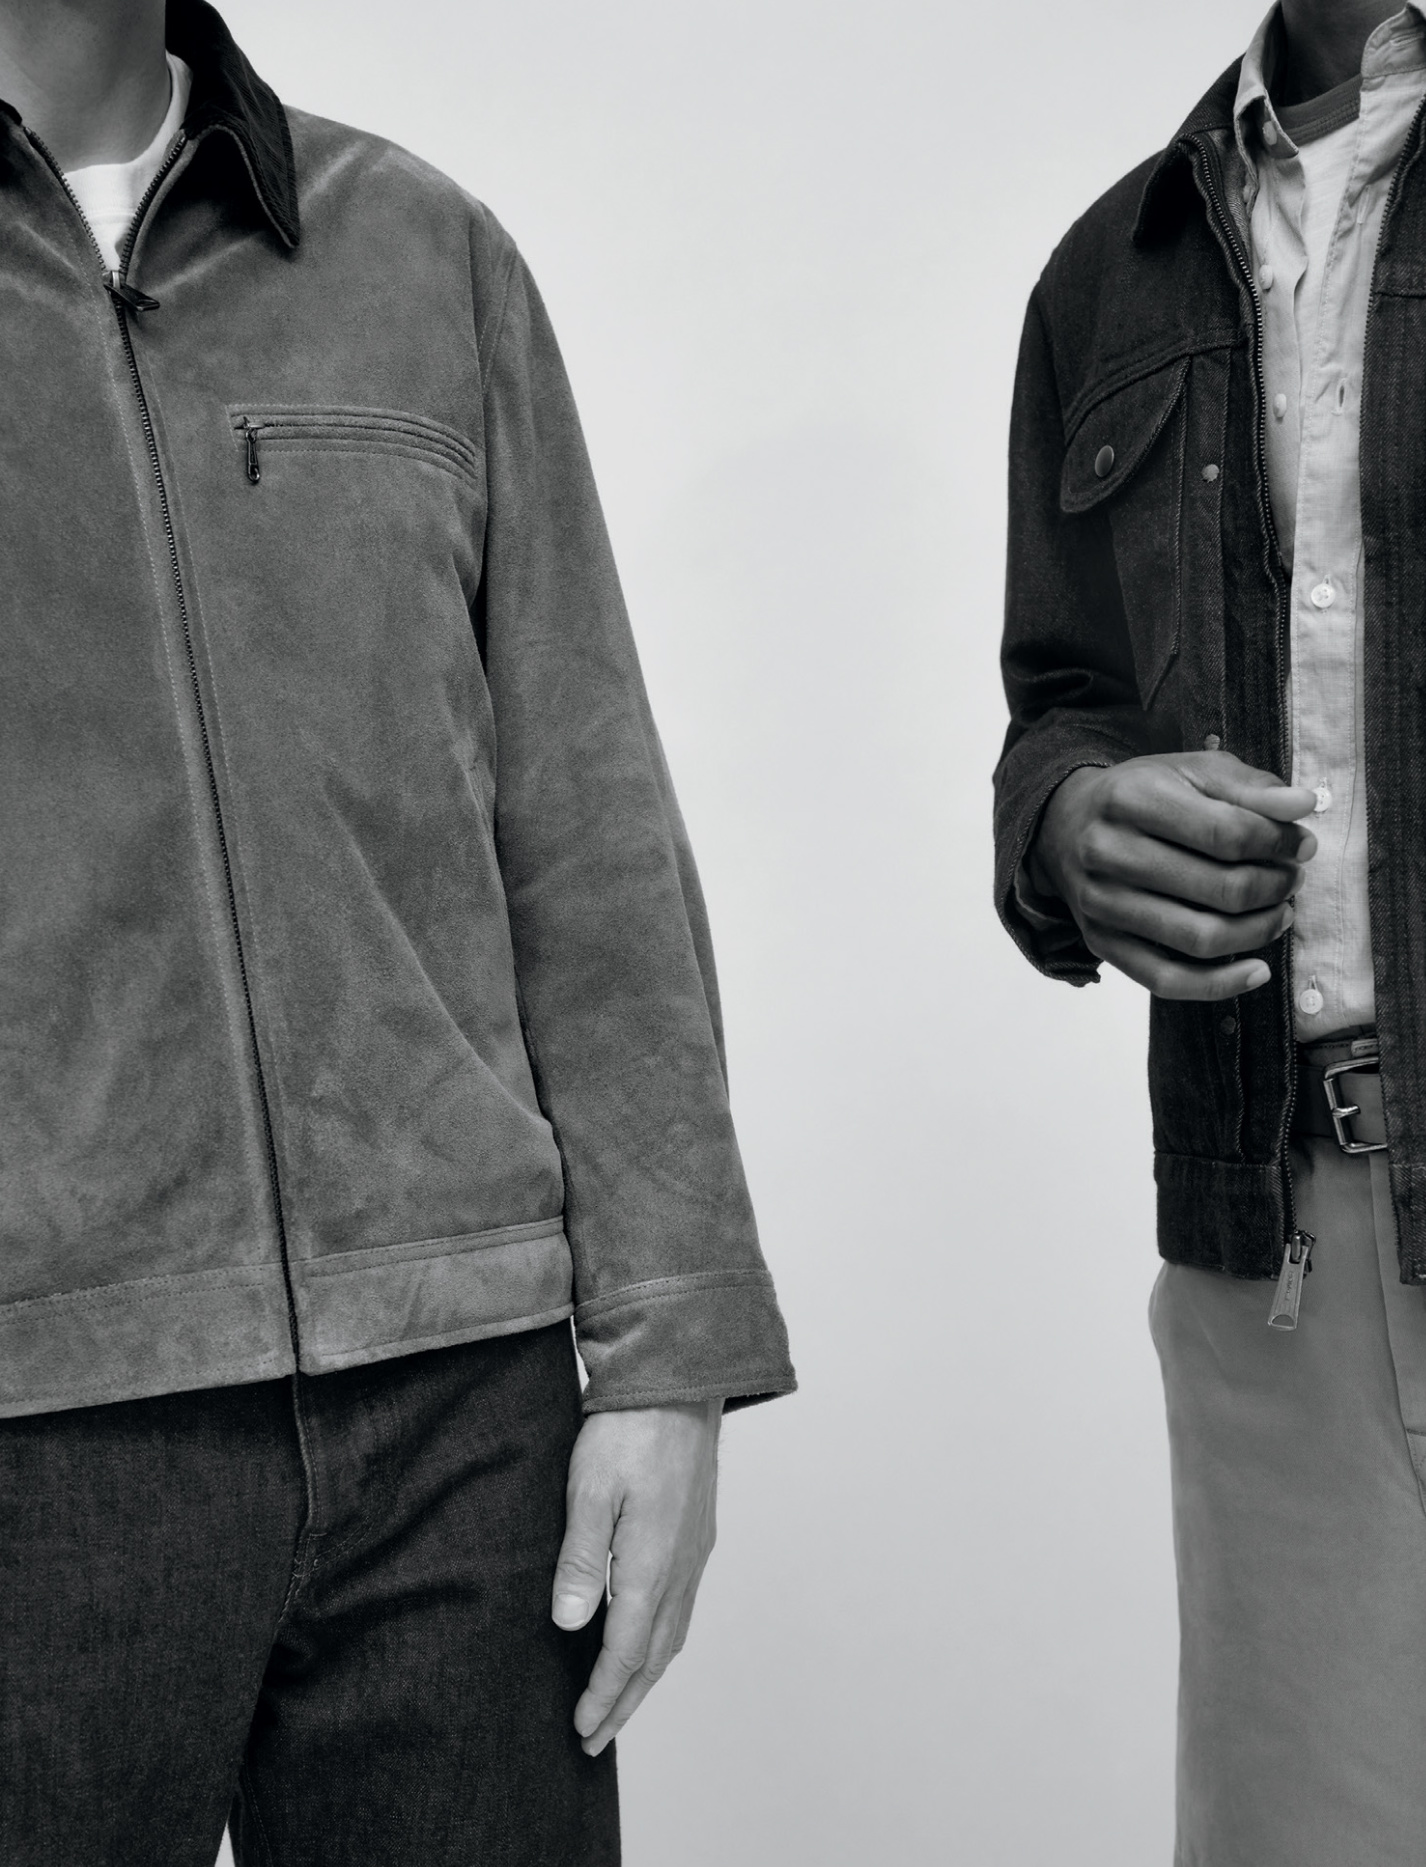 Big Prep's Last Stand? J Crew Taps Brendon Babenzien to Take on the Likes  of Aime Leon Dore